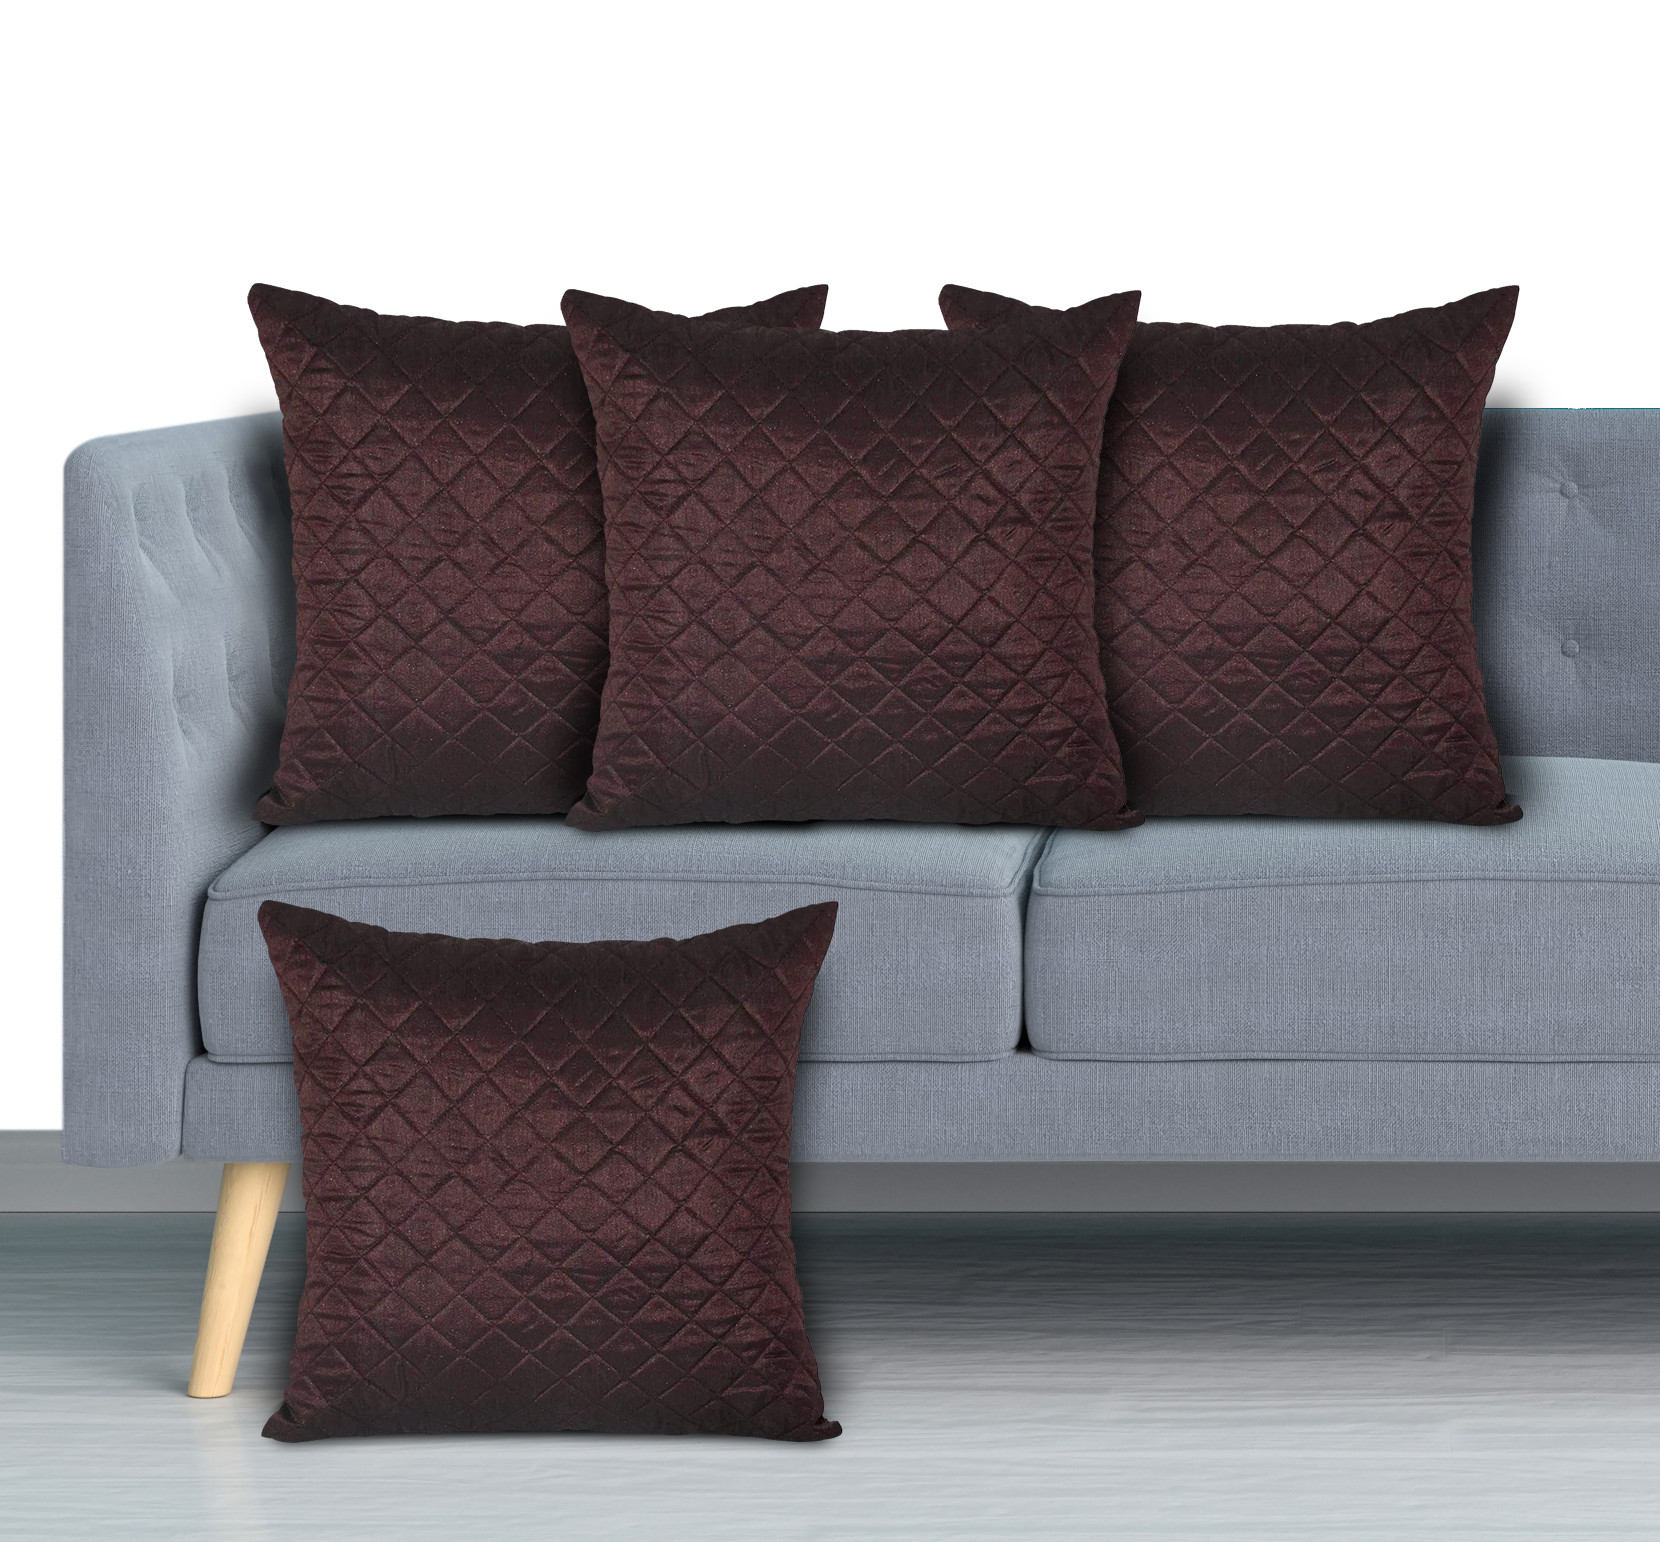 Kuber Industries Quilted Soft Decorative Square Throw Pillow Cover, Cushion Covers, Pillow Case For Sofa Couch Bed Chair, 18x18 Inch-(Maroon & Cream)-HS_38_KUBMART21779